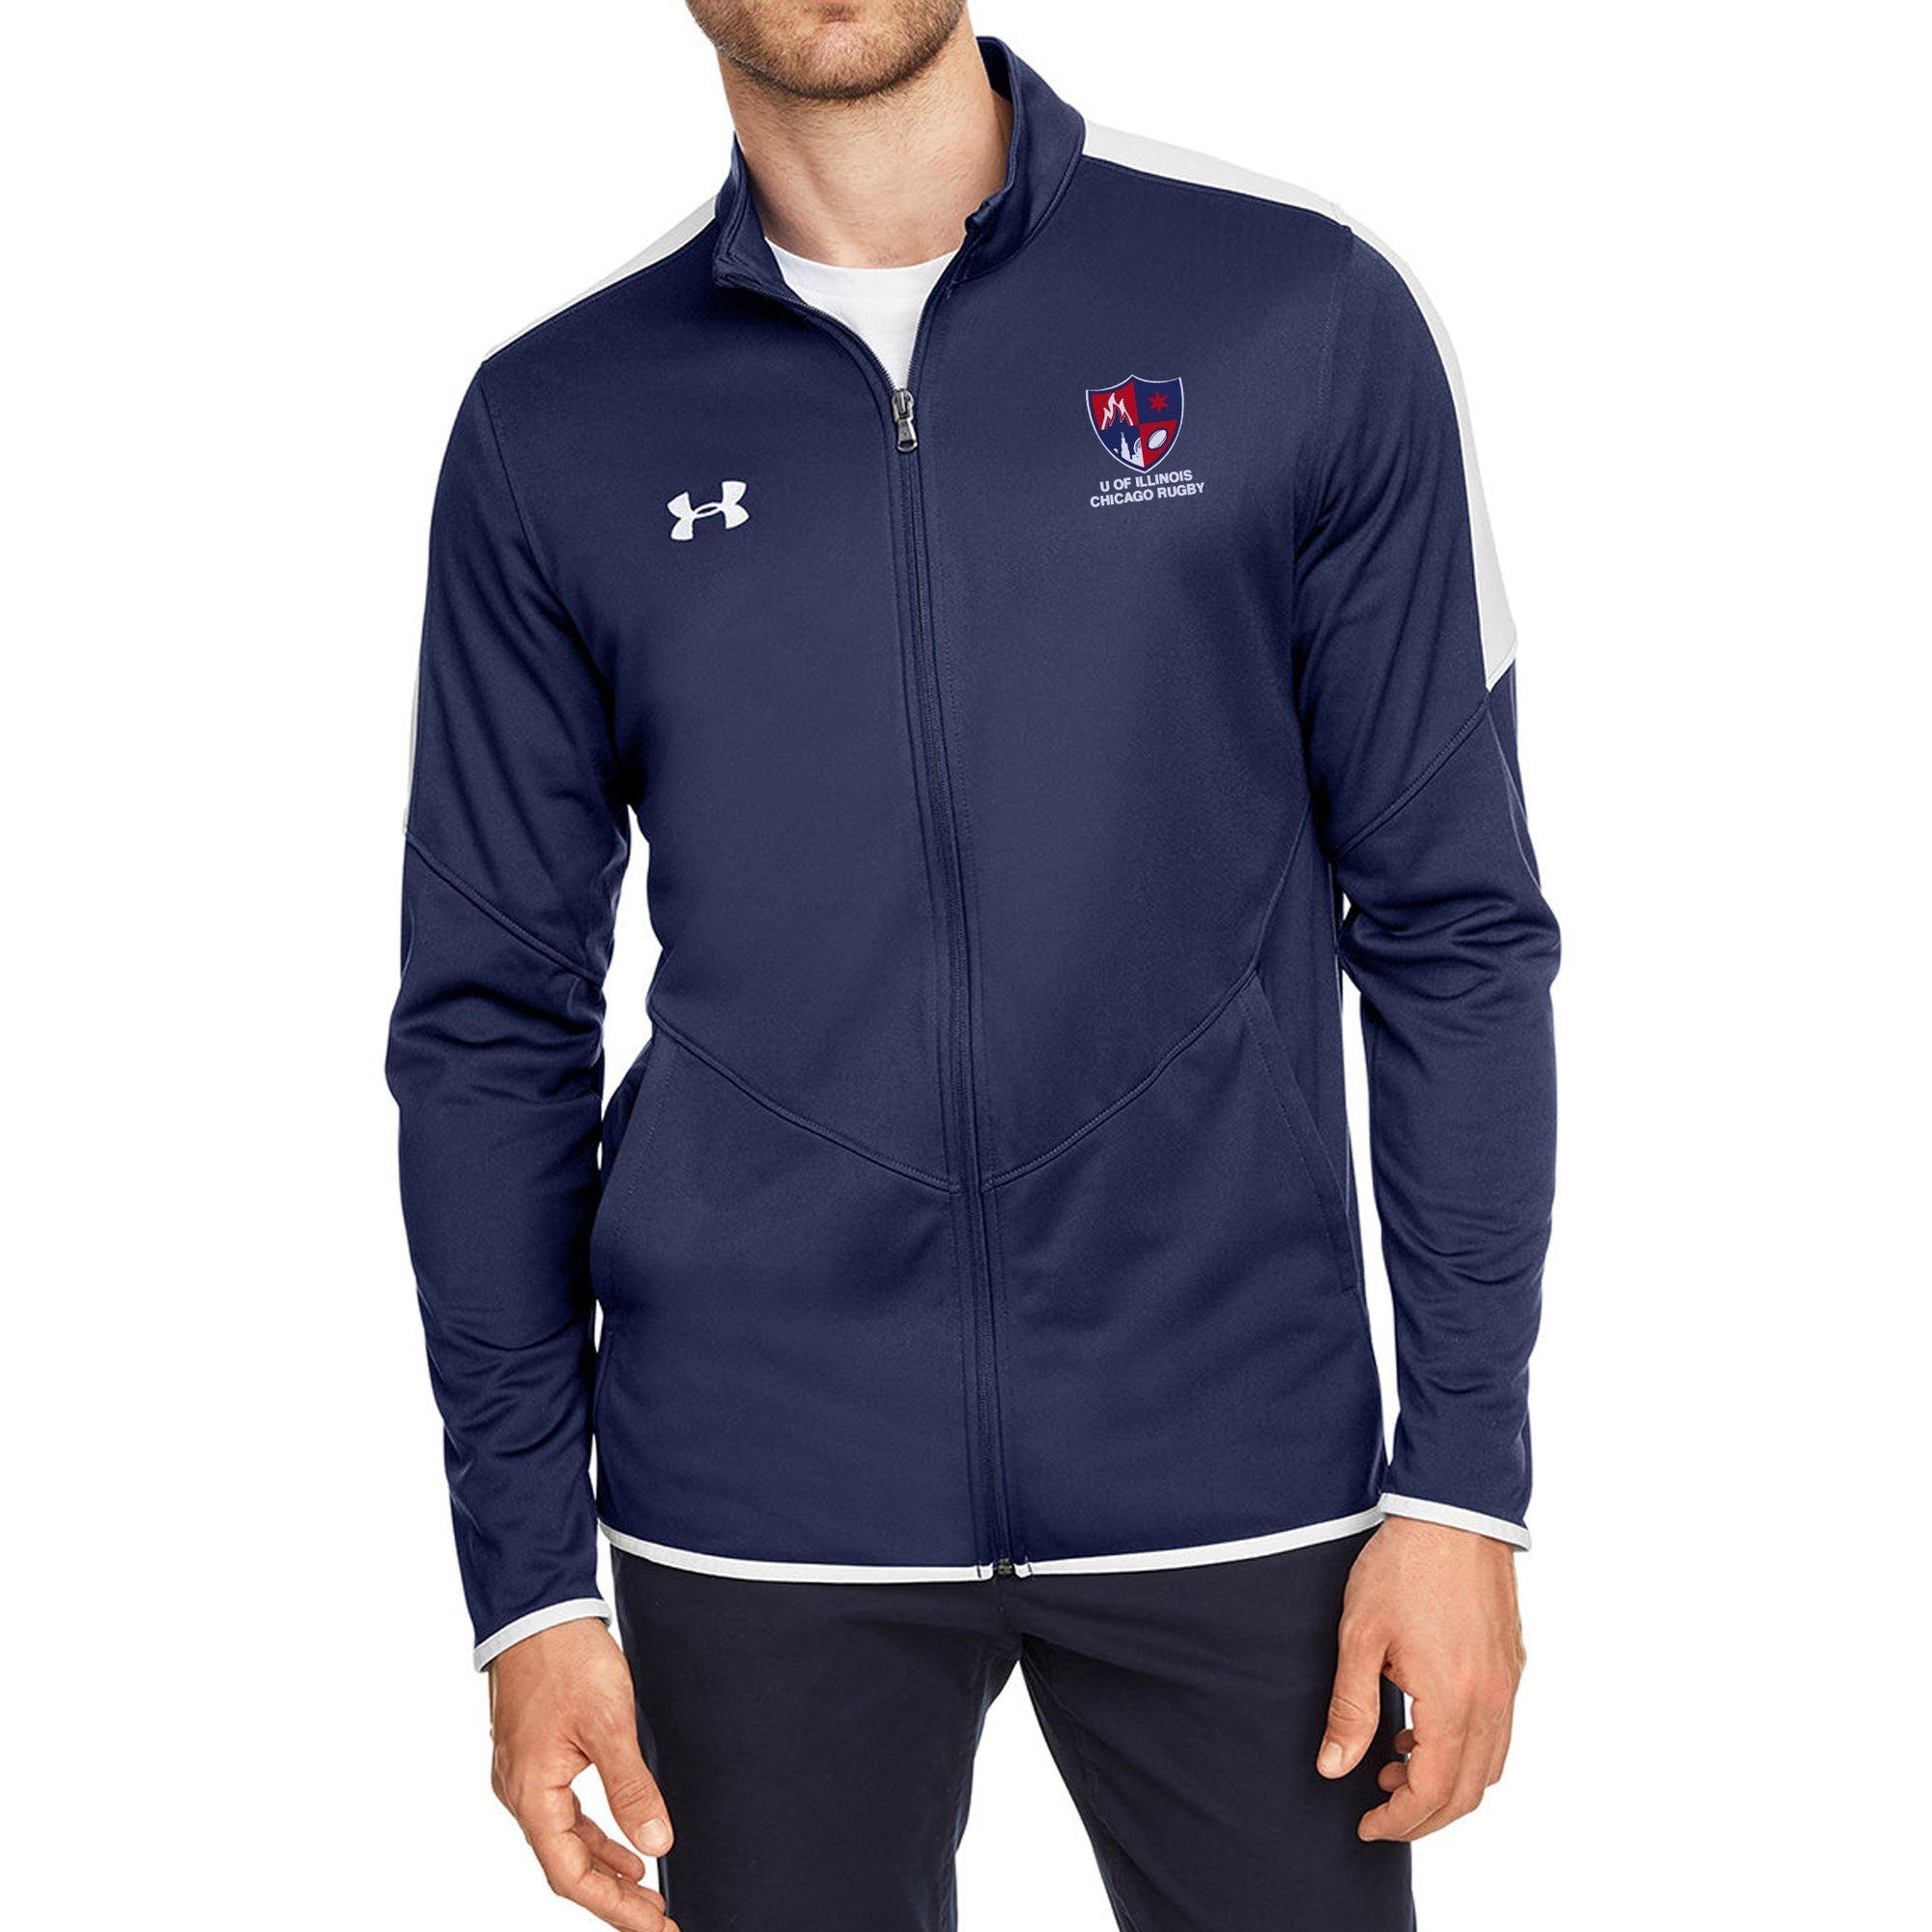 Rugby Imports UIC Men's Rugby UA Rival Knit Jacket